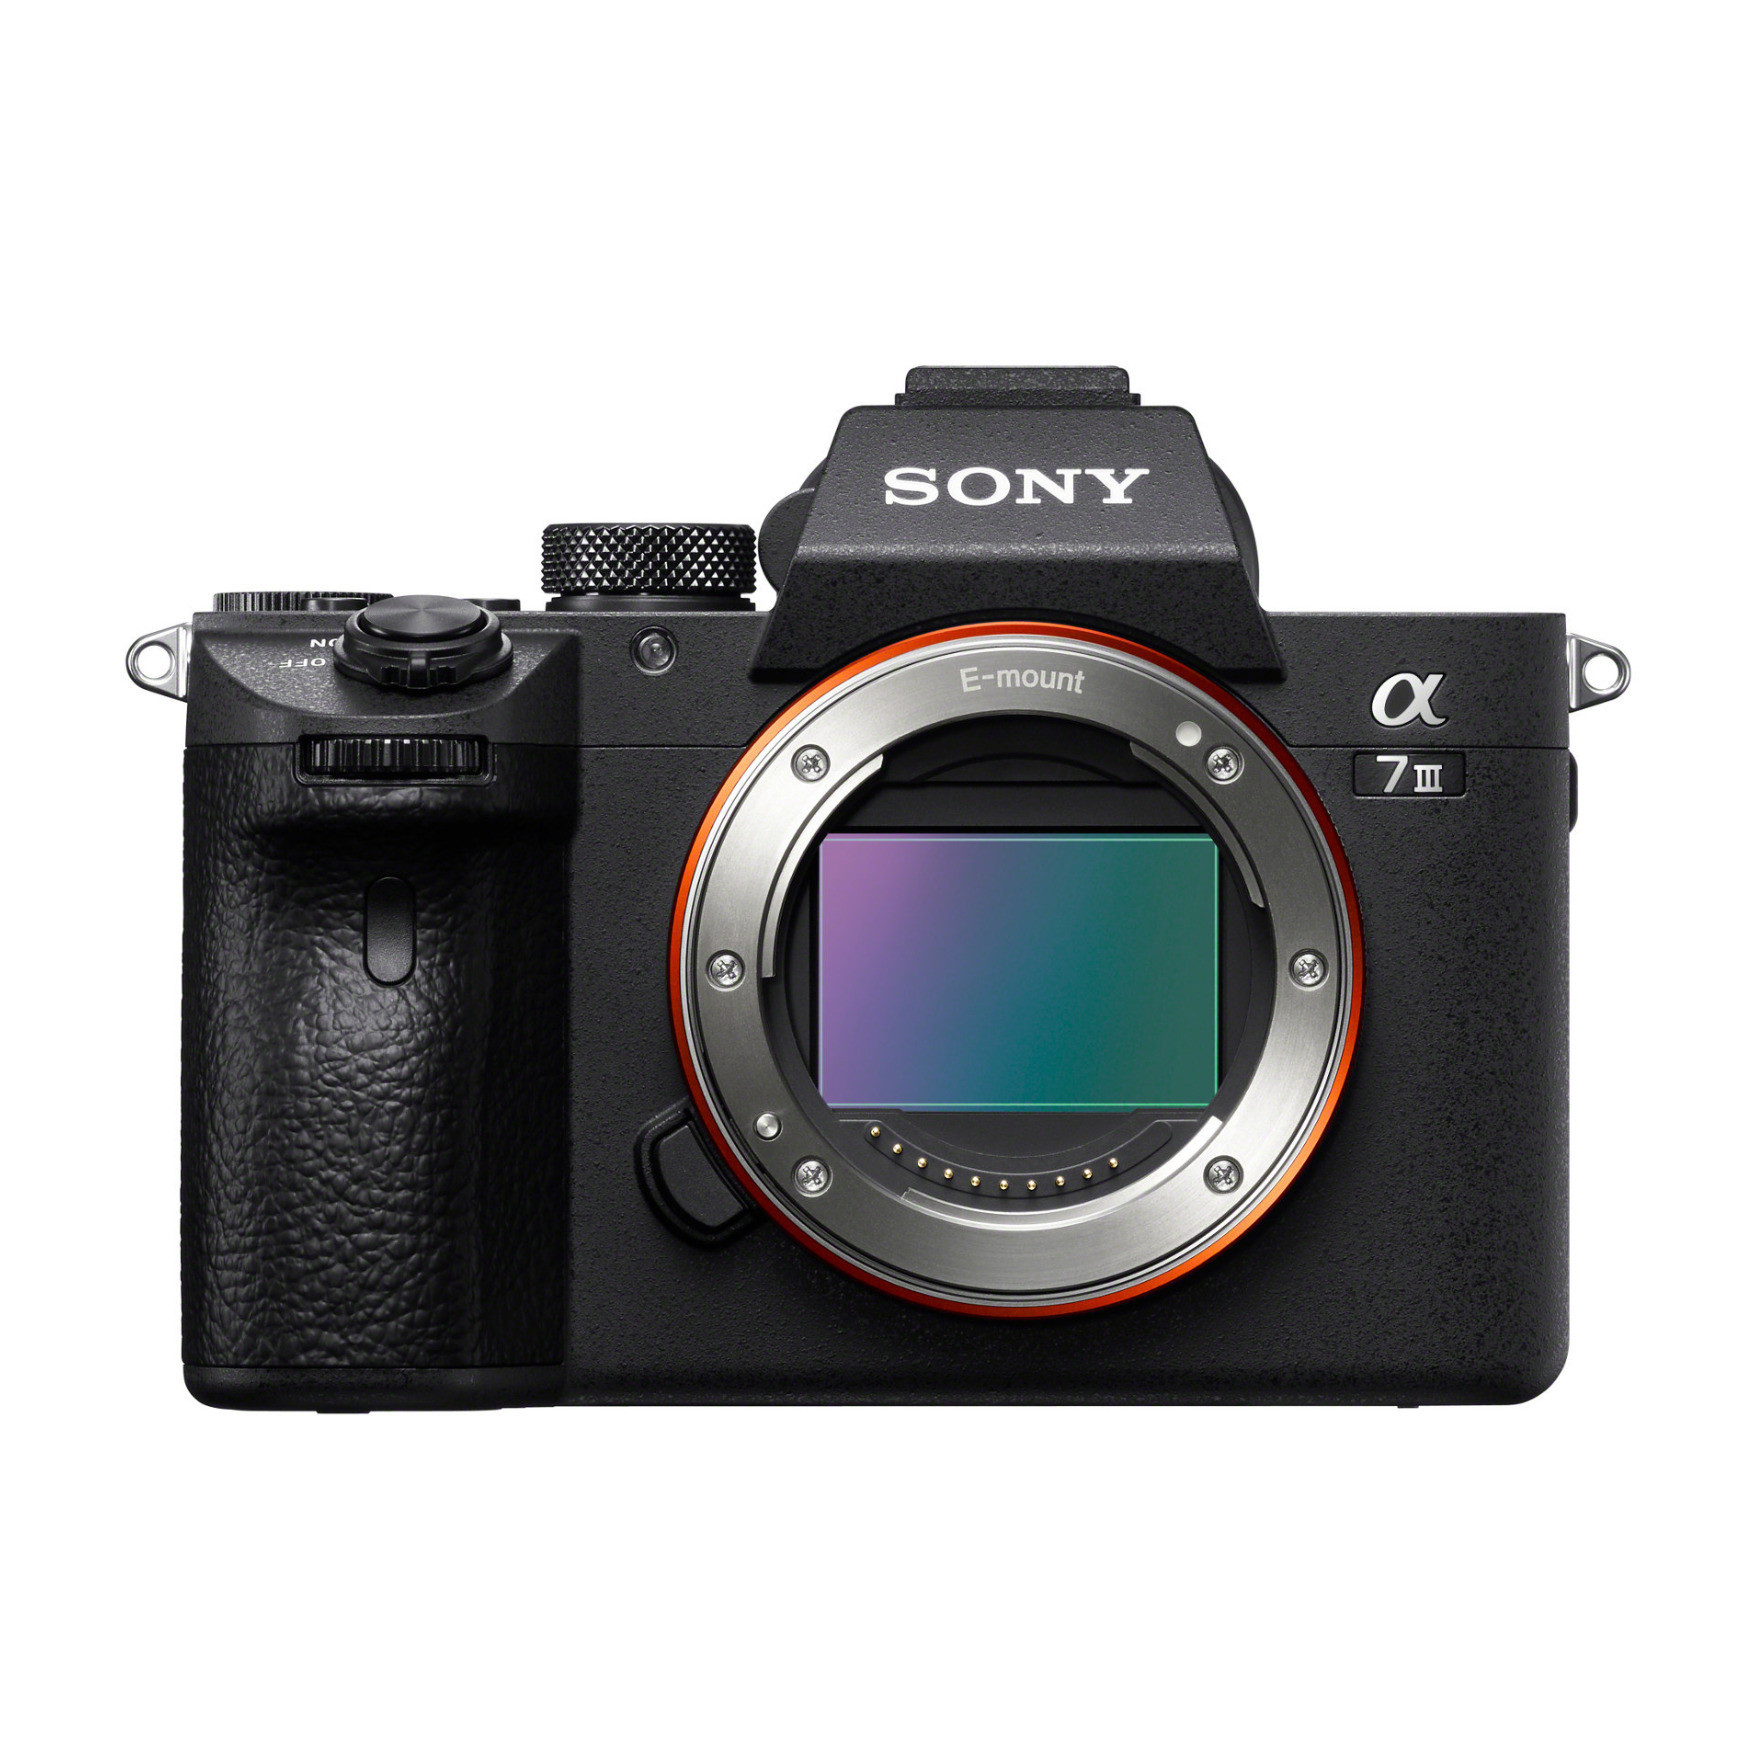 Educational Discount: Sony Alpha a7 III 24.2MP Full Frame Mirrorless Digital Camera (body only) for $1458 or with 28-70mm Lens for $1568